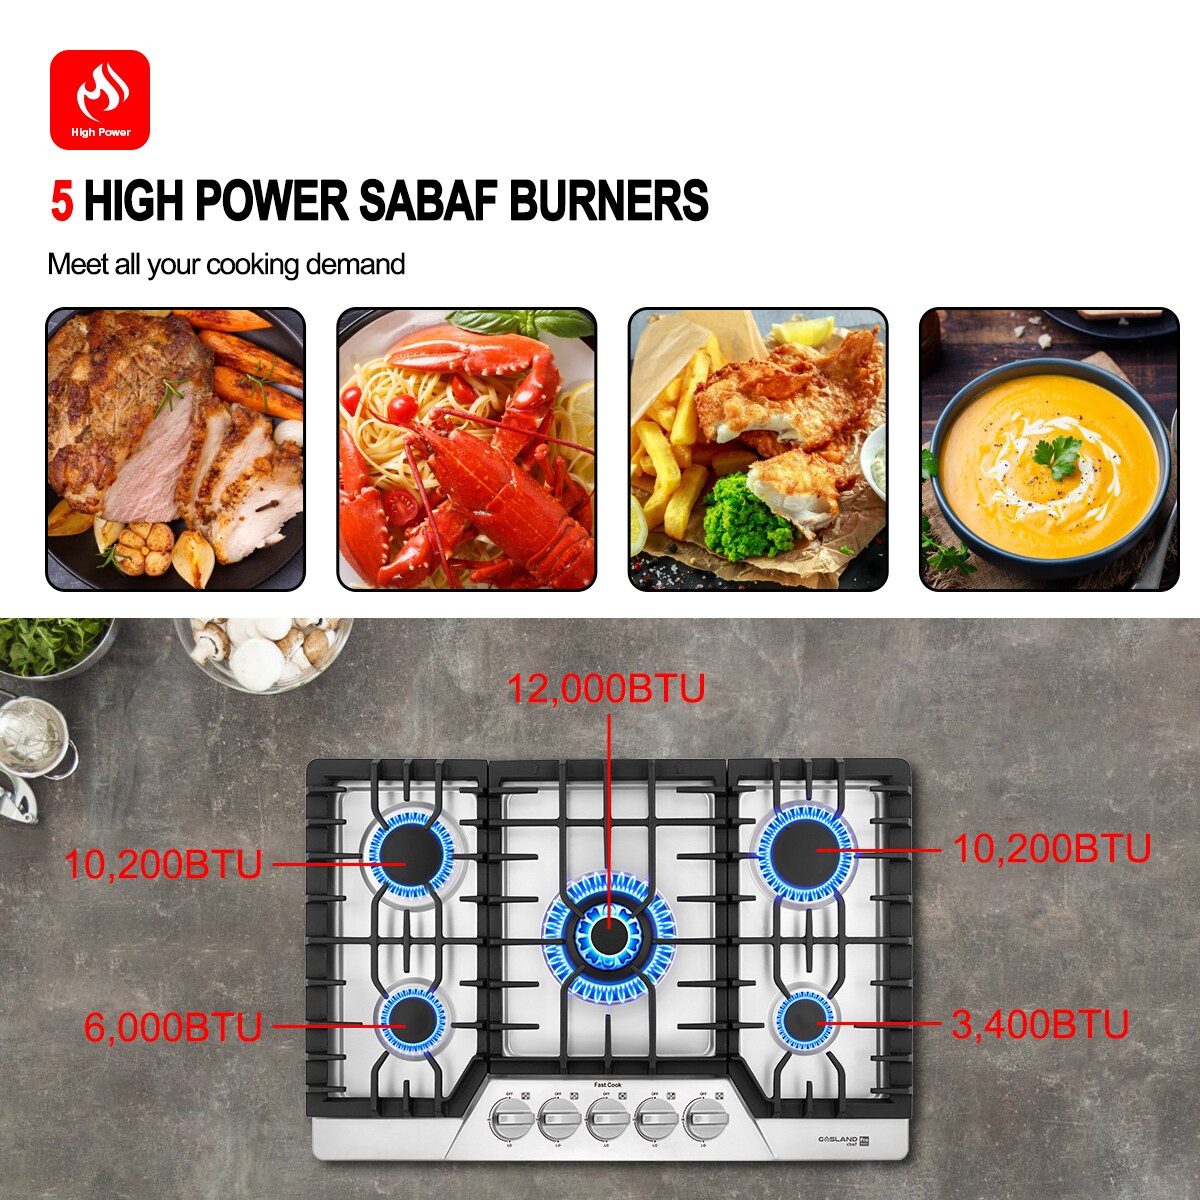 GAS Cooktop 30 inch, Gasland Chef Pro GH2305SF 5 Burner GAS Stove, Built-in NG/LPG Convertible GAS Cooktops, GAS Countertop Plug-In with